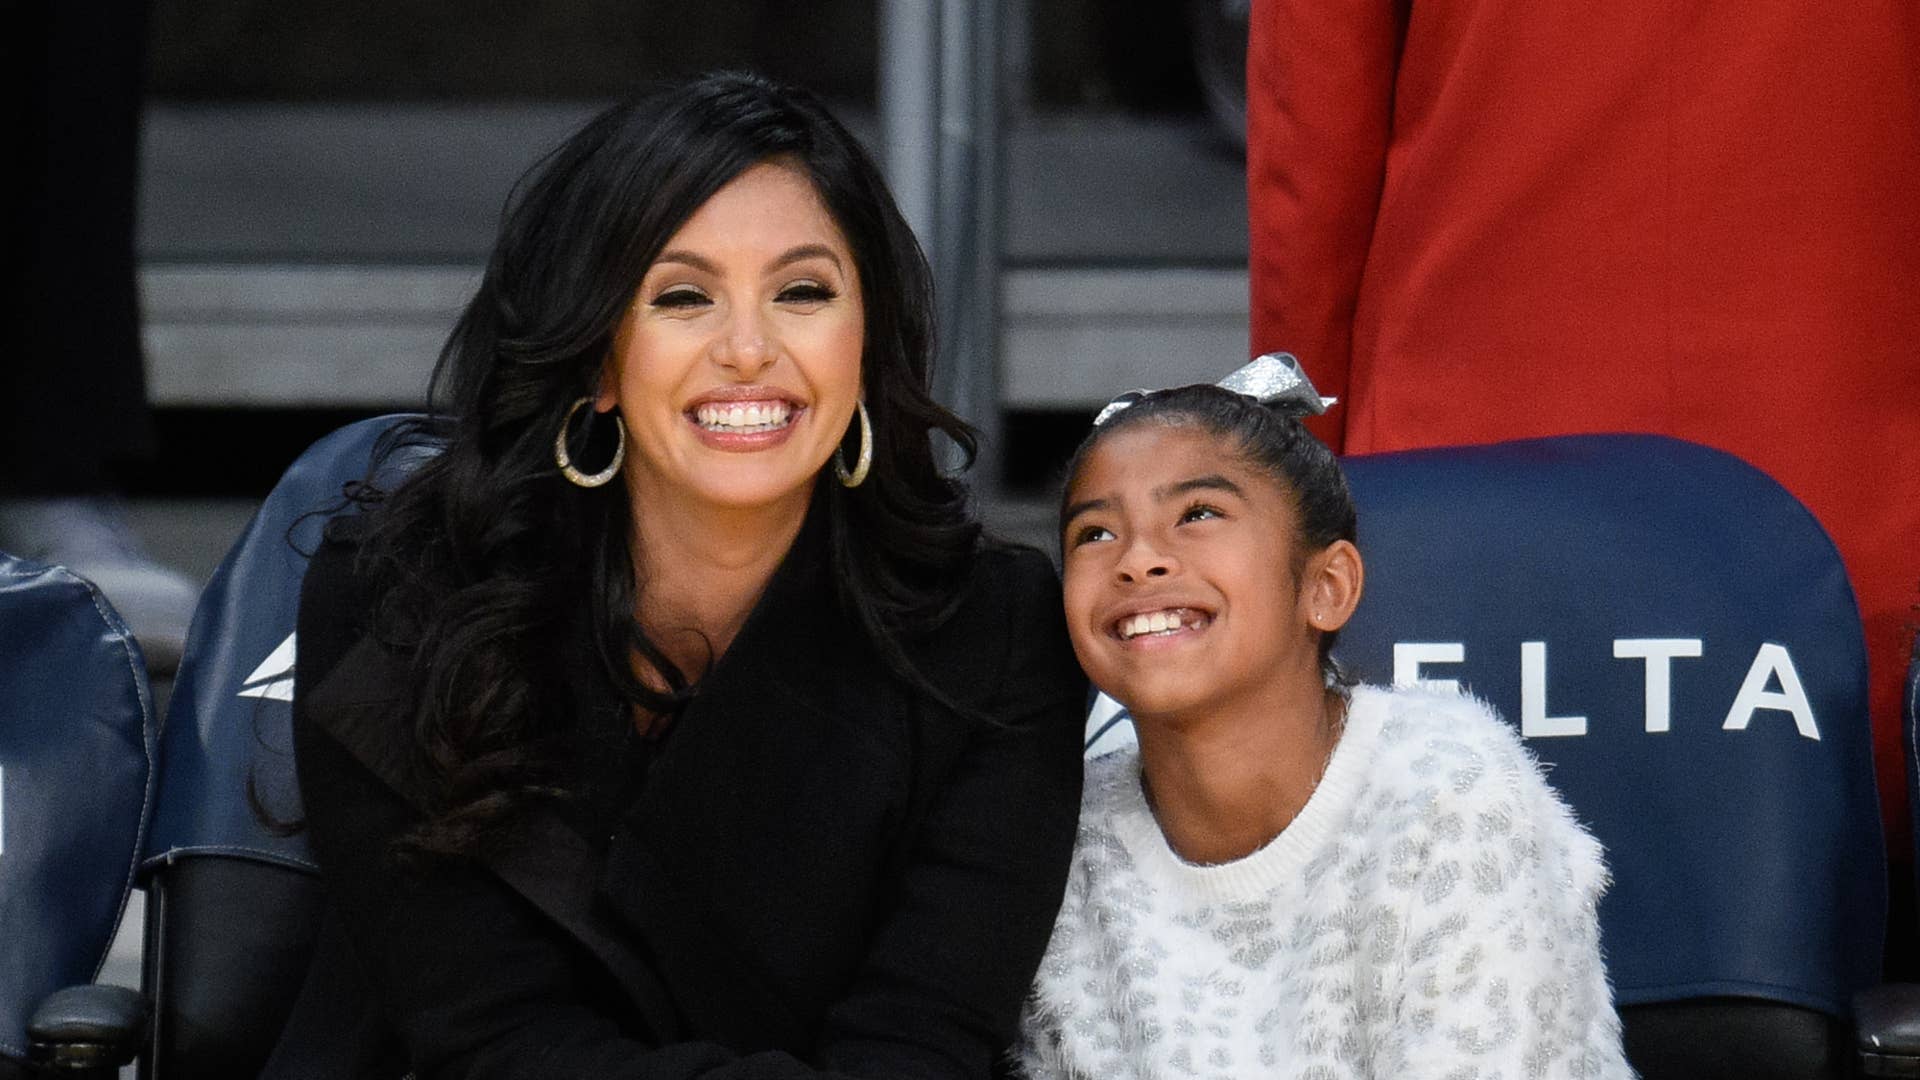 Vanessa Bryant and Gianna Bryant attend a basketball game.